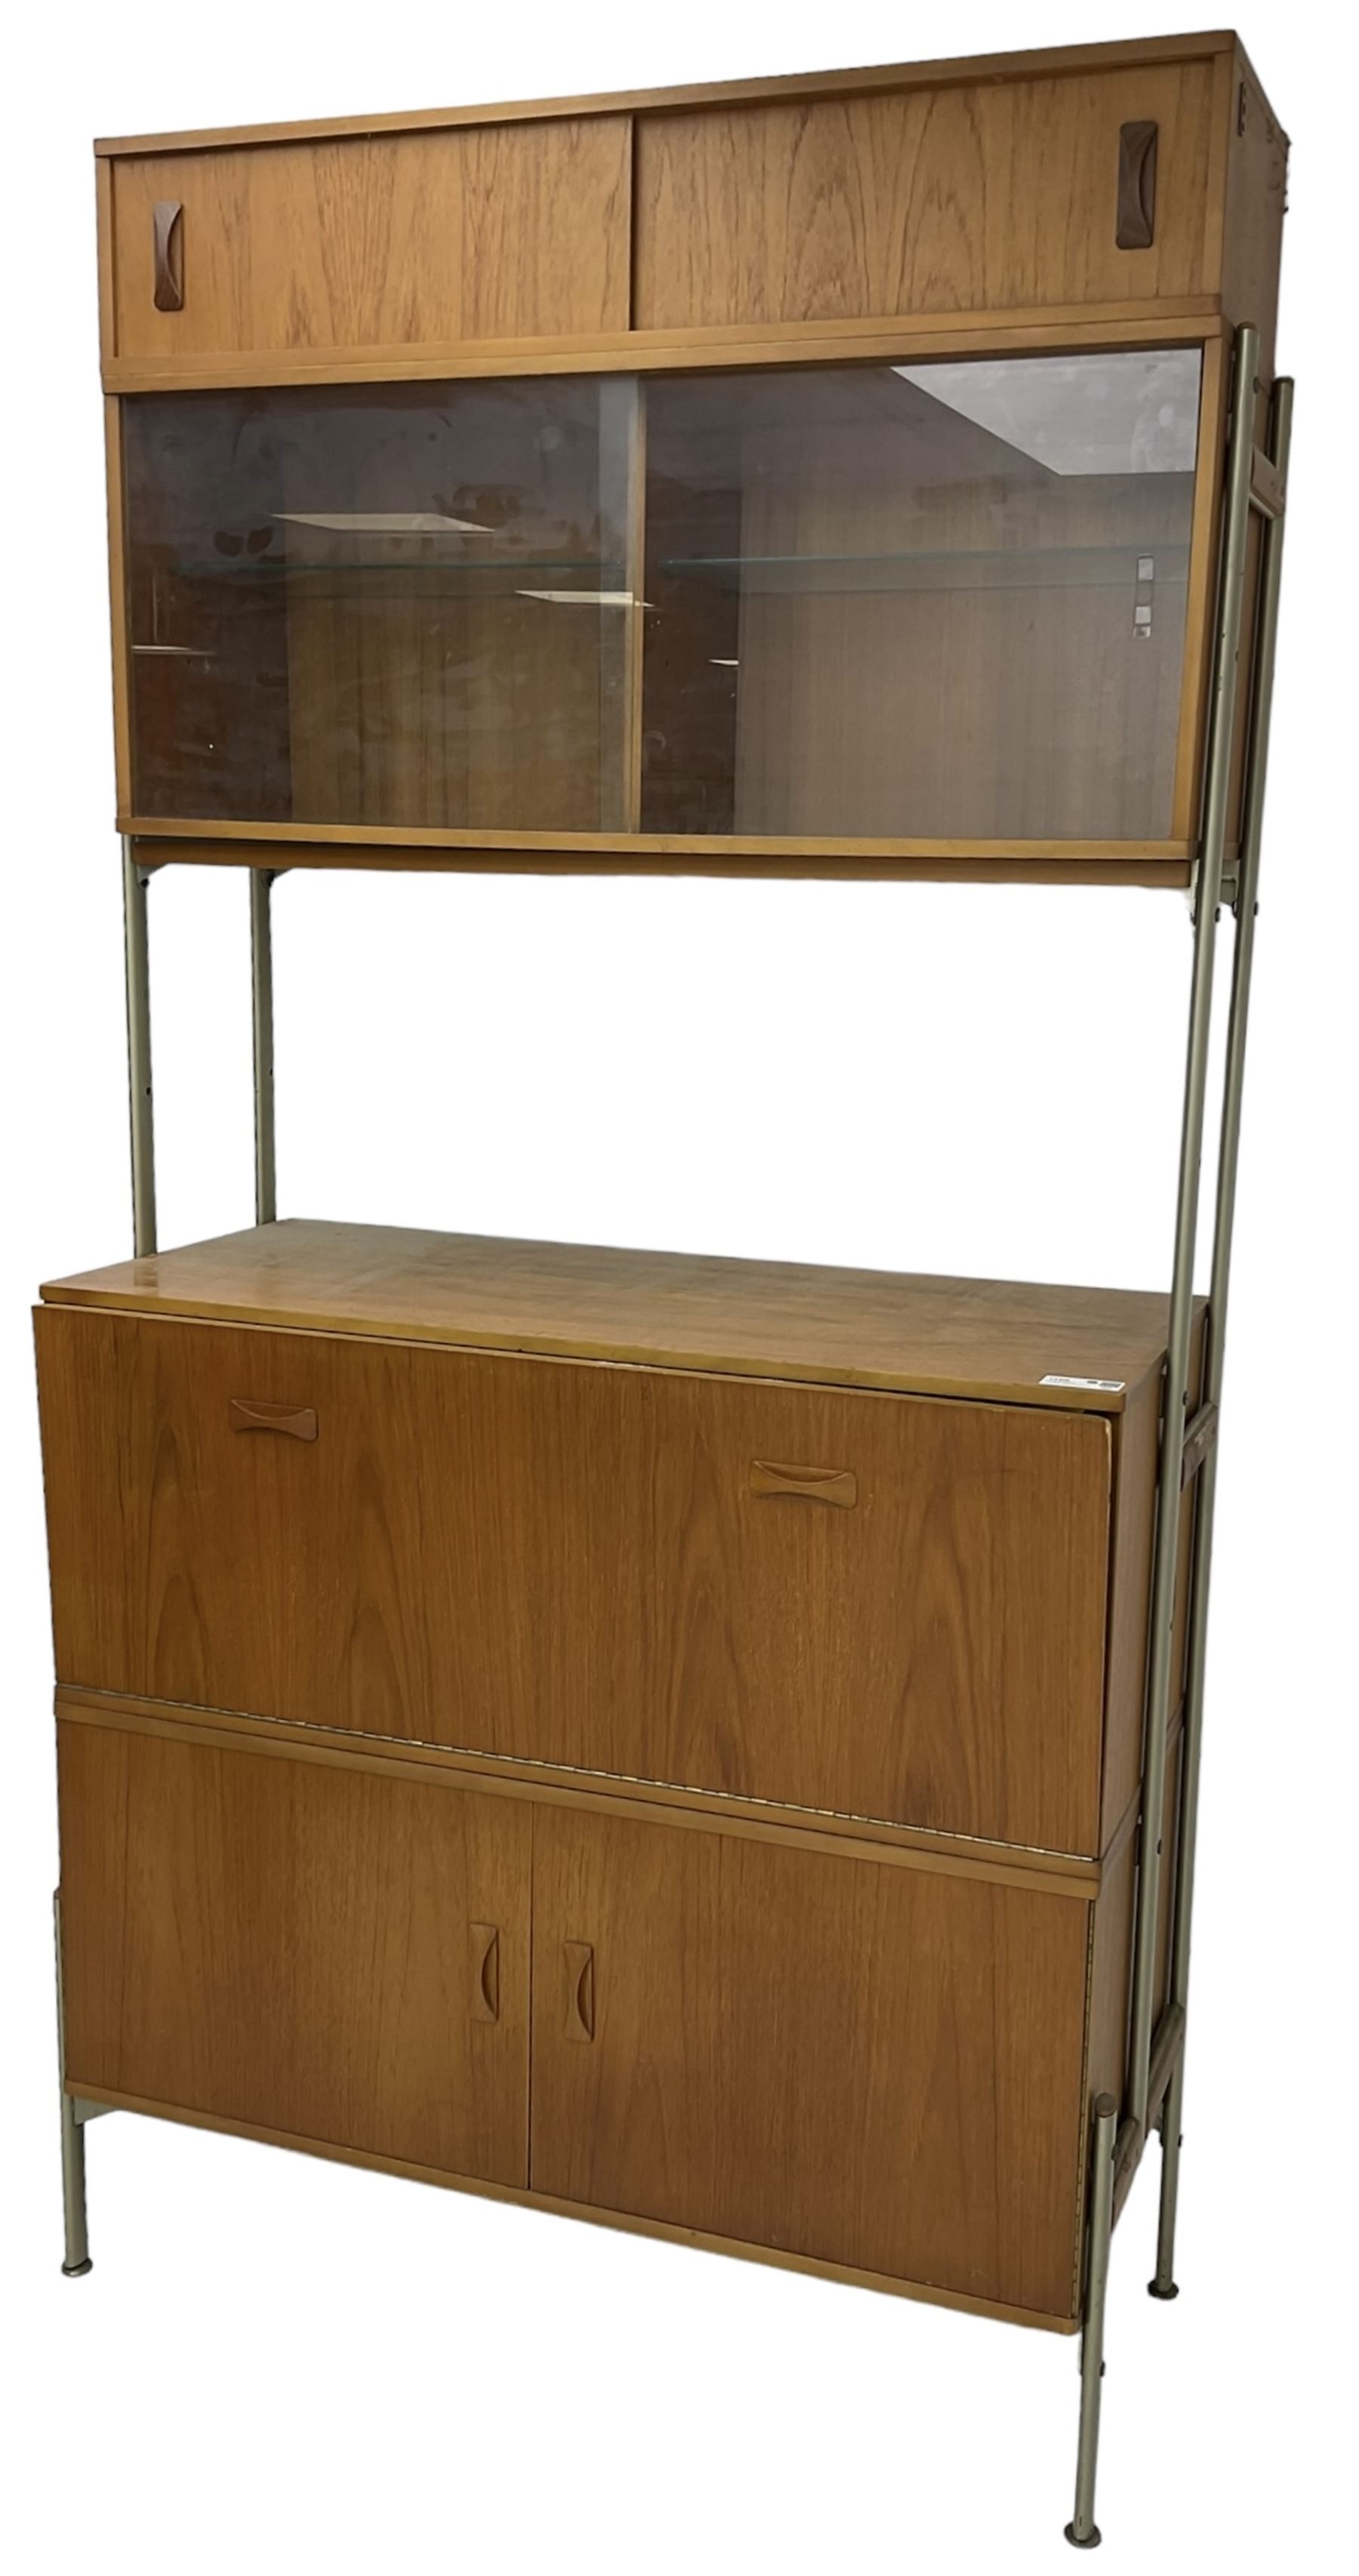 Remploy - mid-20th century teak sectional wall display unit or room divider - Image 2 of 5